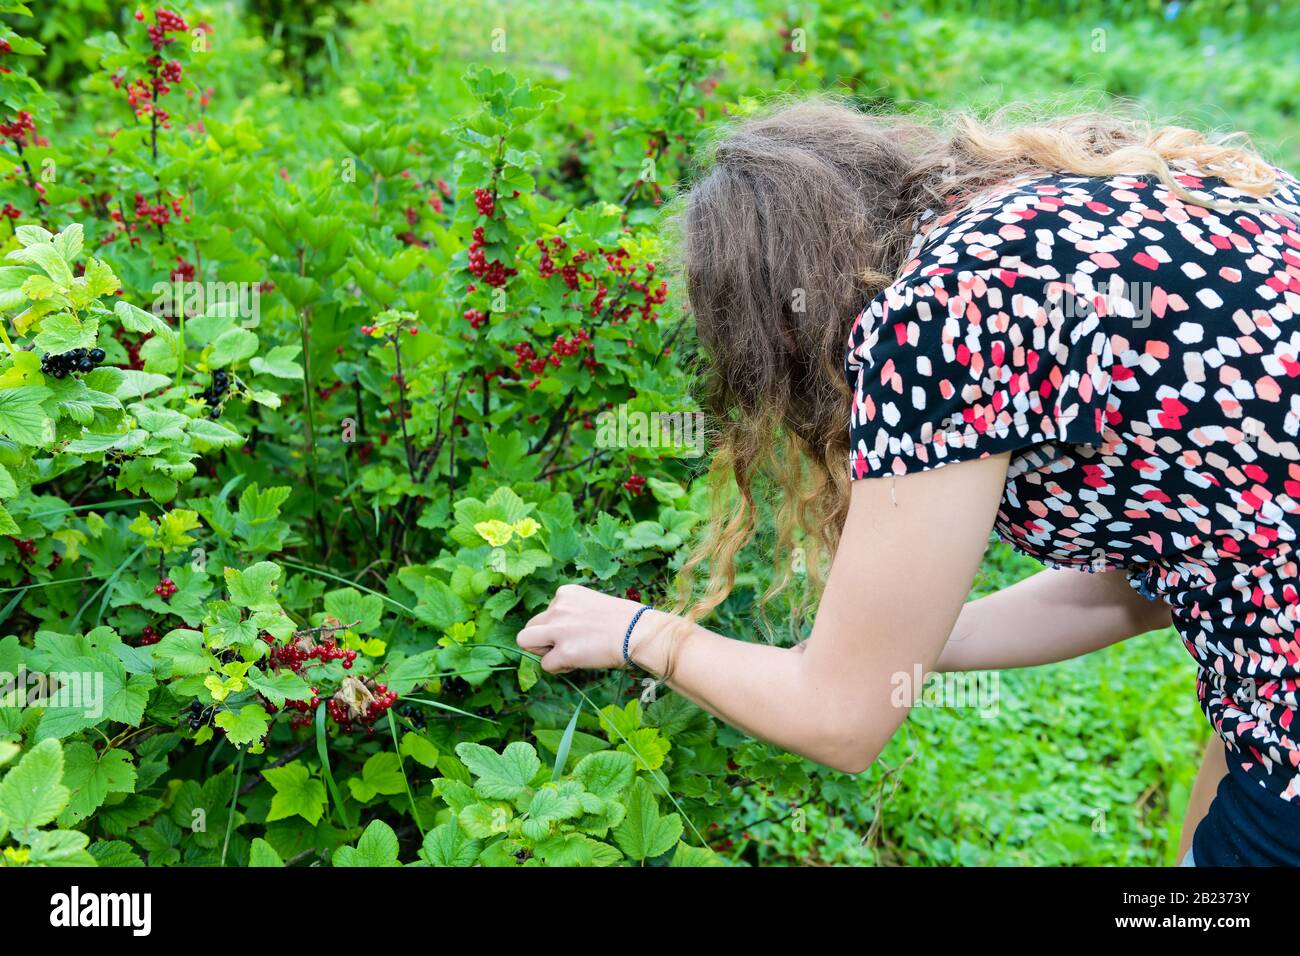 Hanging red currant berries ripening on plant bush in Russia or Ukraine garden dacha farm with young girl woman hand picking holding fruit Stock Photo